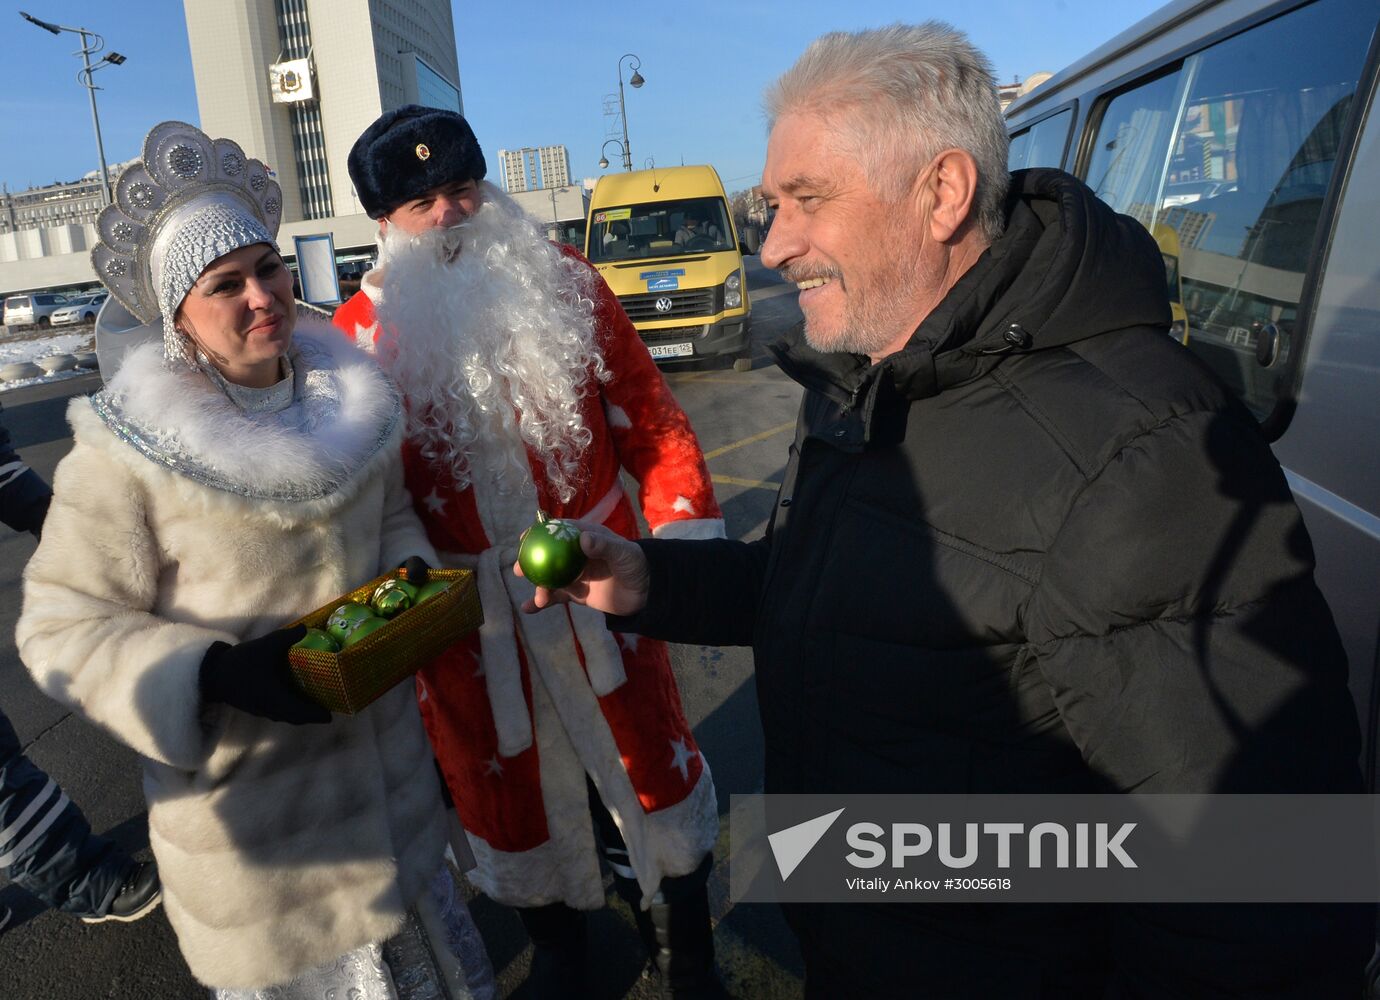 Road police officers in Vladivostok greet drivers and pedestrians dressed up as Father Frost and Snow Maiden